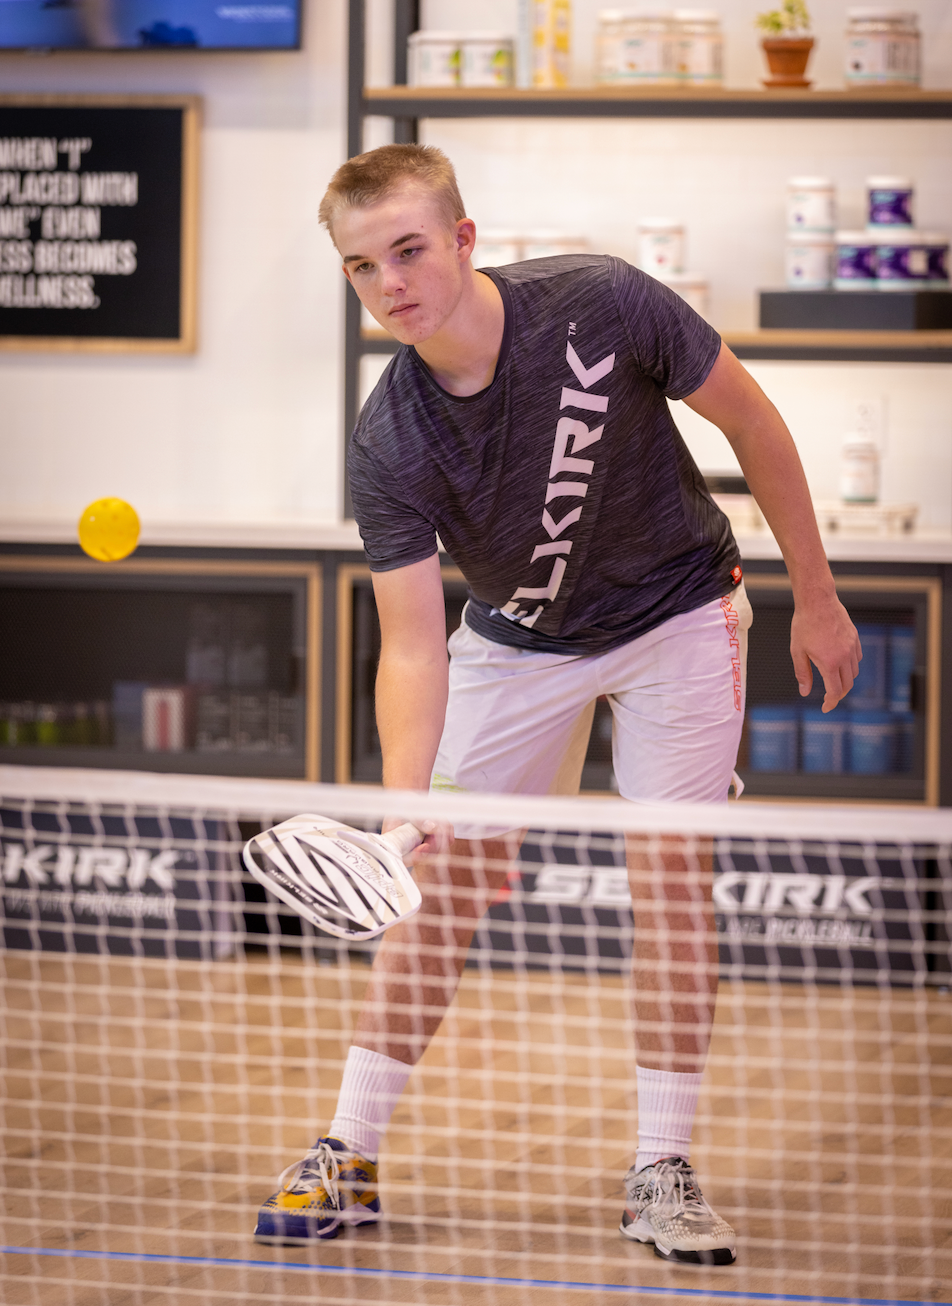 A teenage boy plays pickleball indoors. He stands on a wooden floor ready to hit a ball at the net.